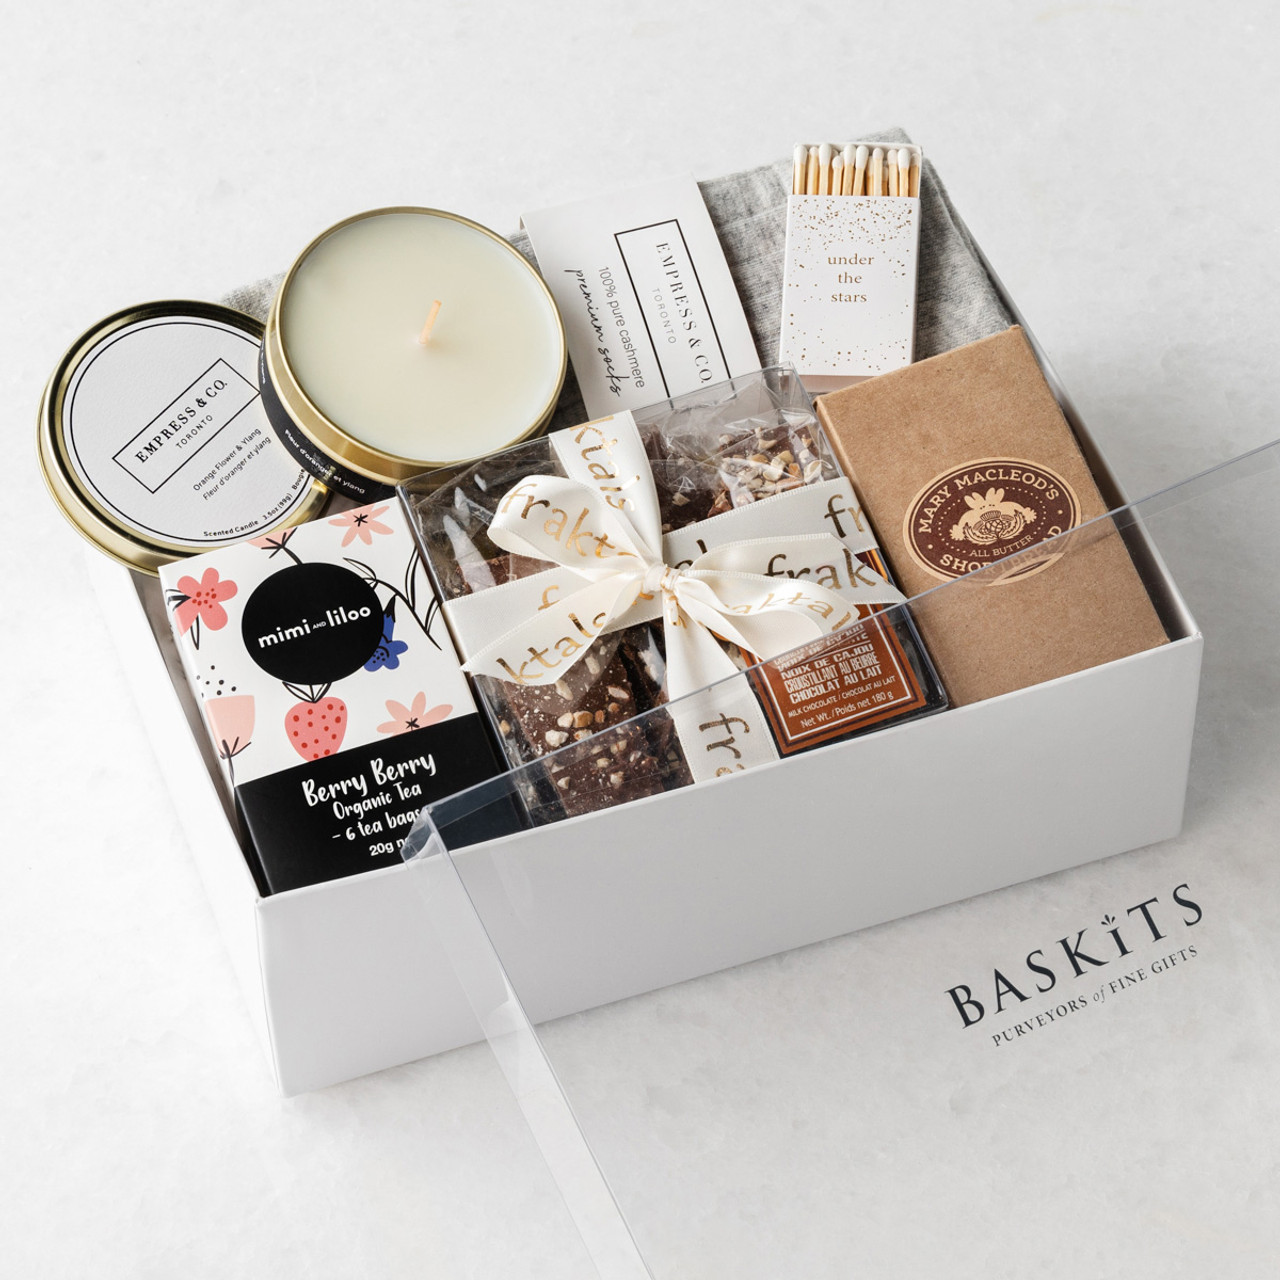 Simply the best gift box for her